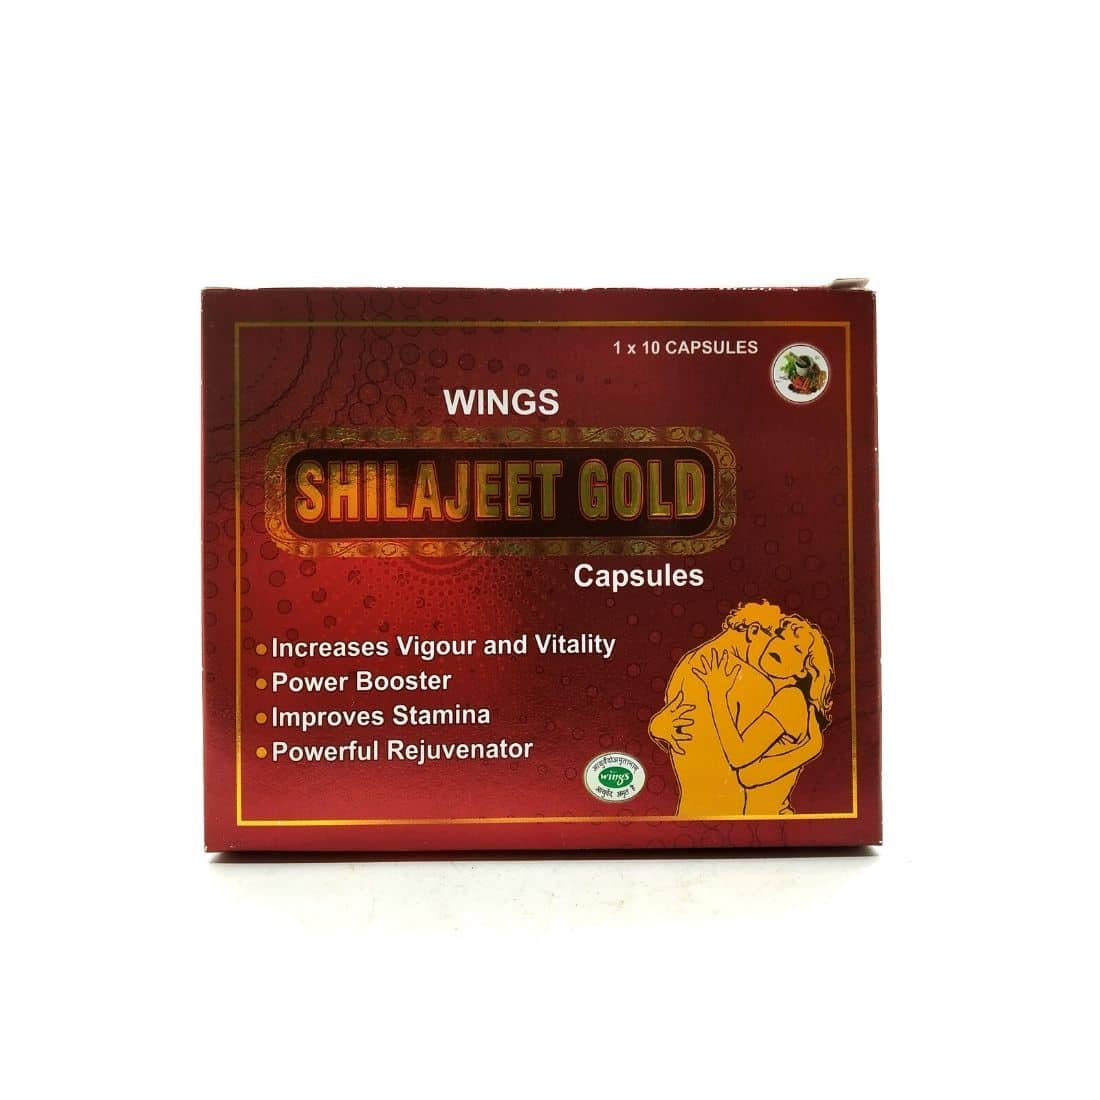 Increases vitality and stamina and strength in men, reduces stress and is a powerful rejuvenator Shilajit Gold Capsules.